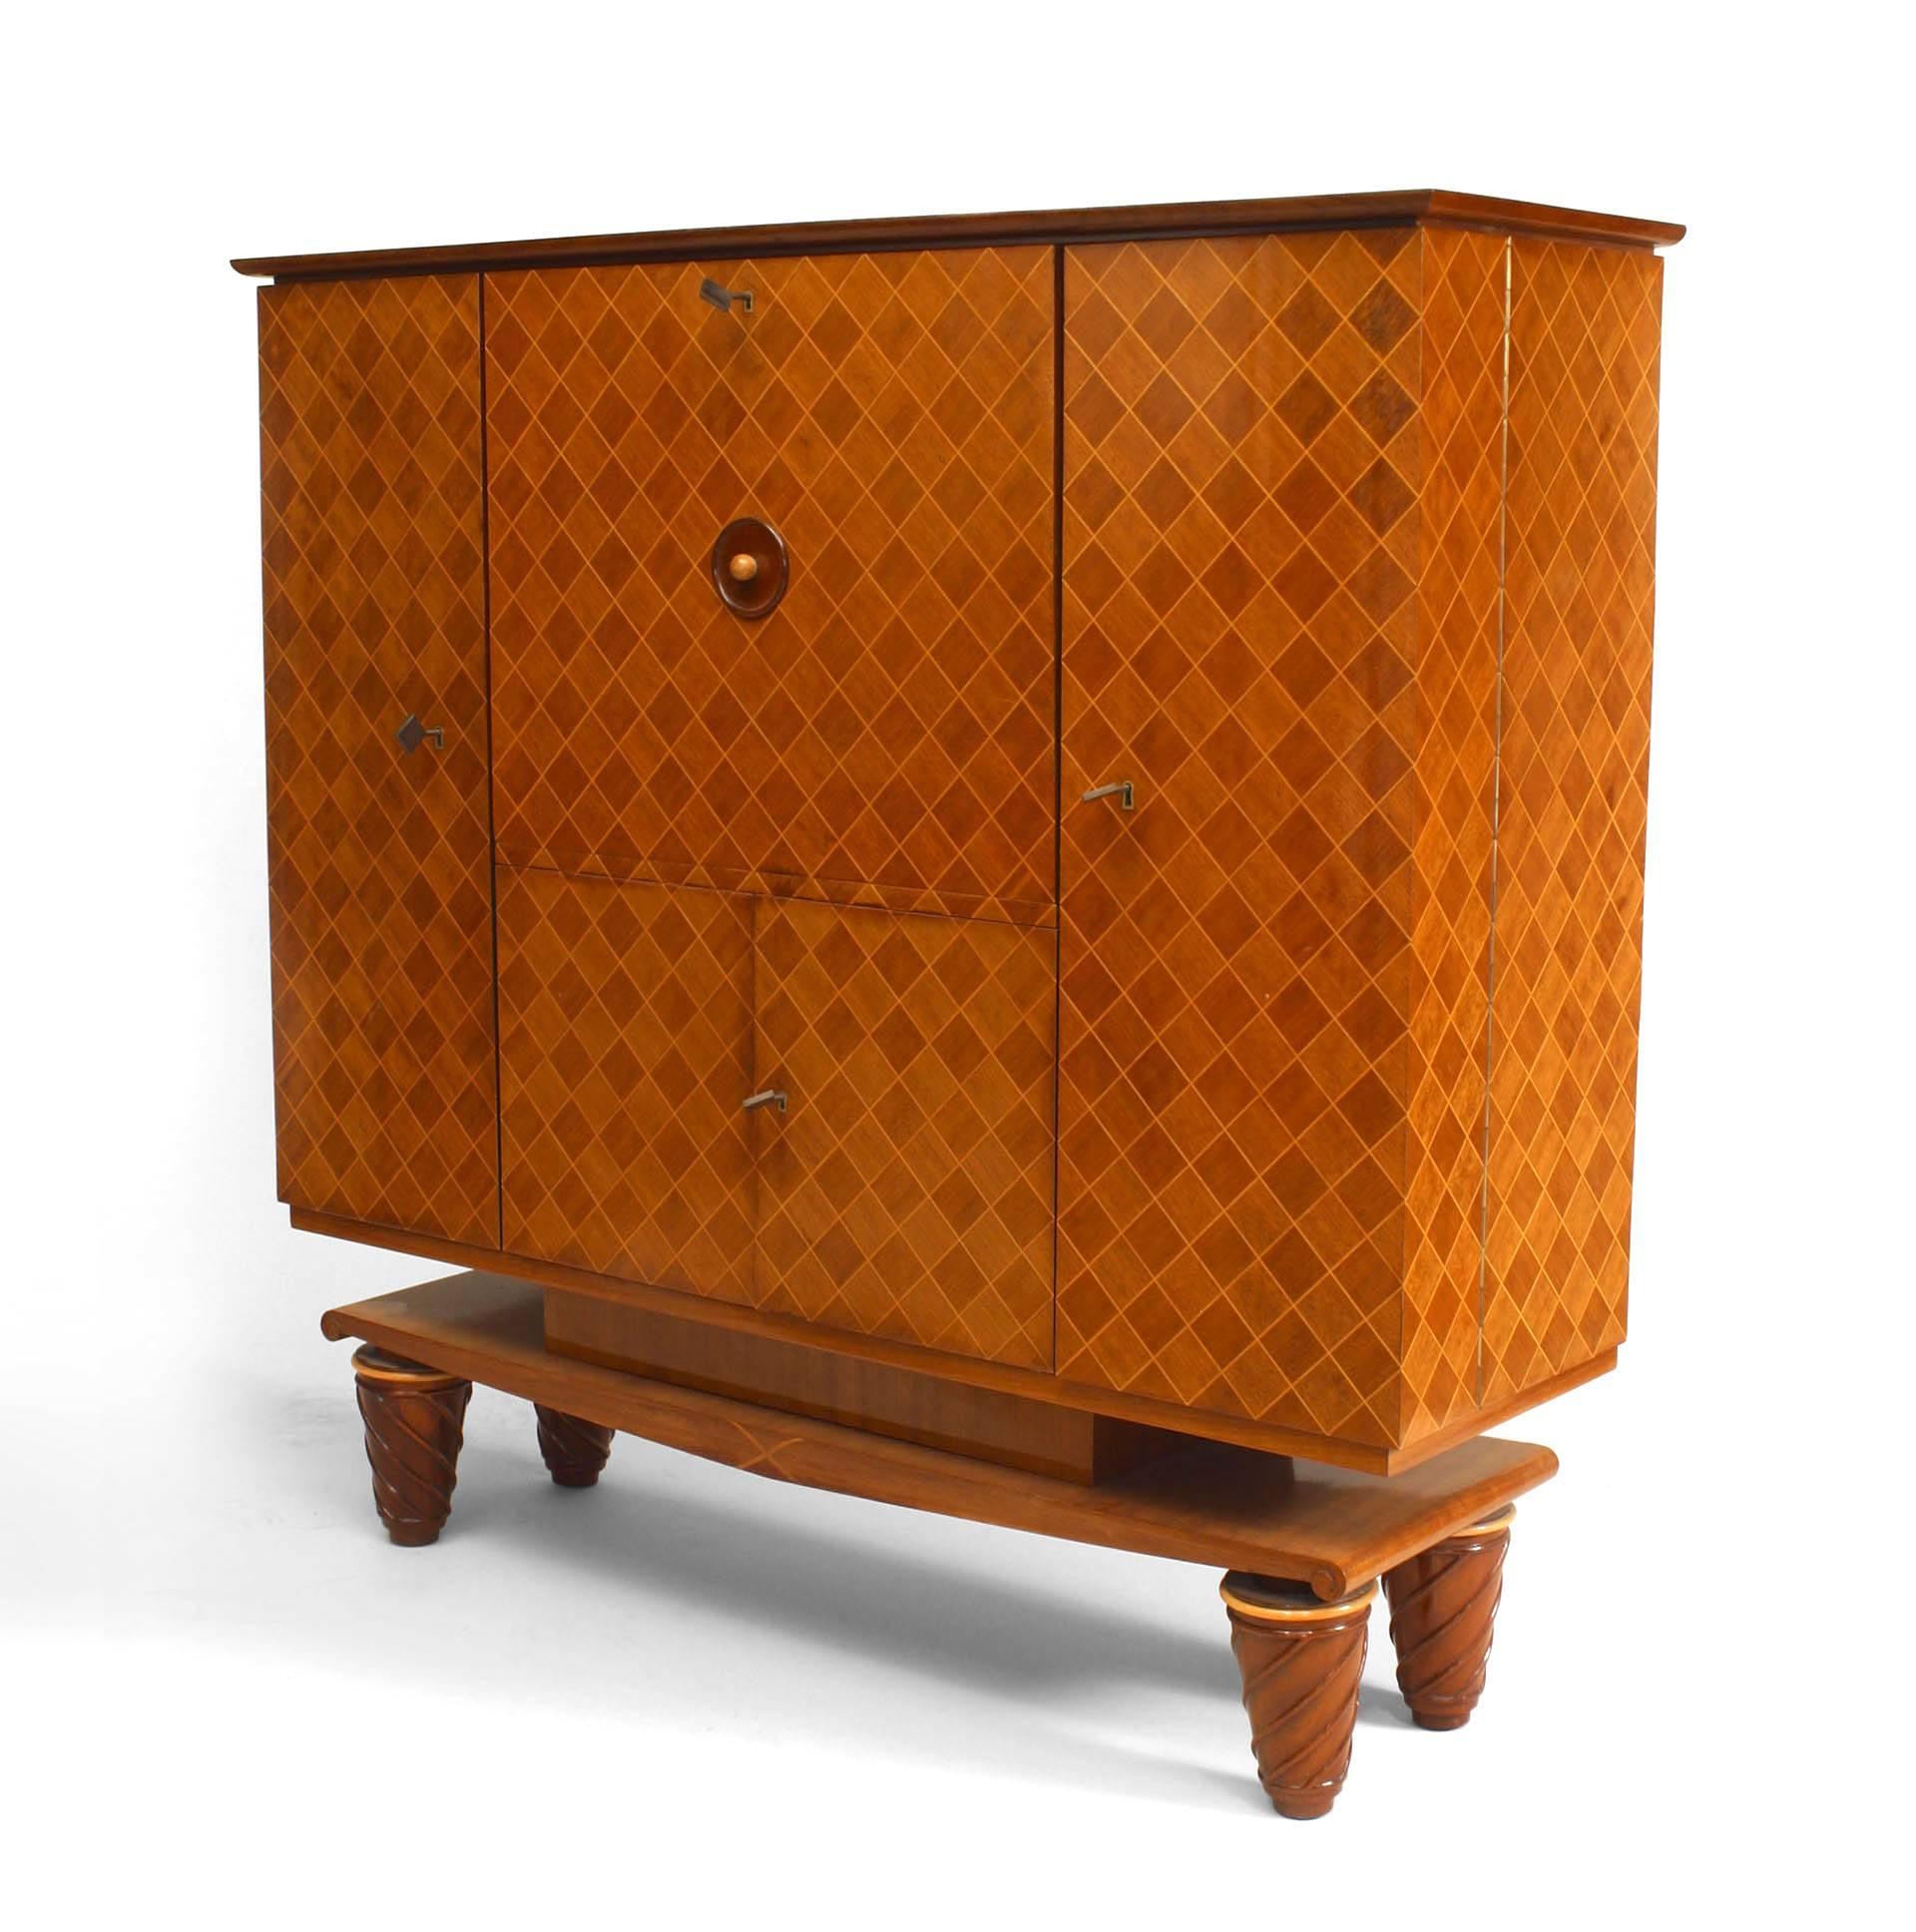 French Mid-Century (1940s) walnut & satinwood inlaid diamond design bar cabinet on platform base with swirled legs and bronze detail. (fully fitted interior/glass top)
